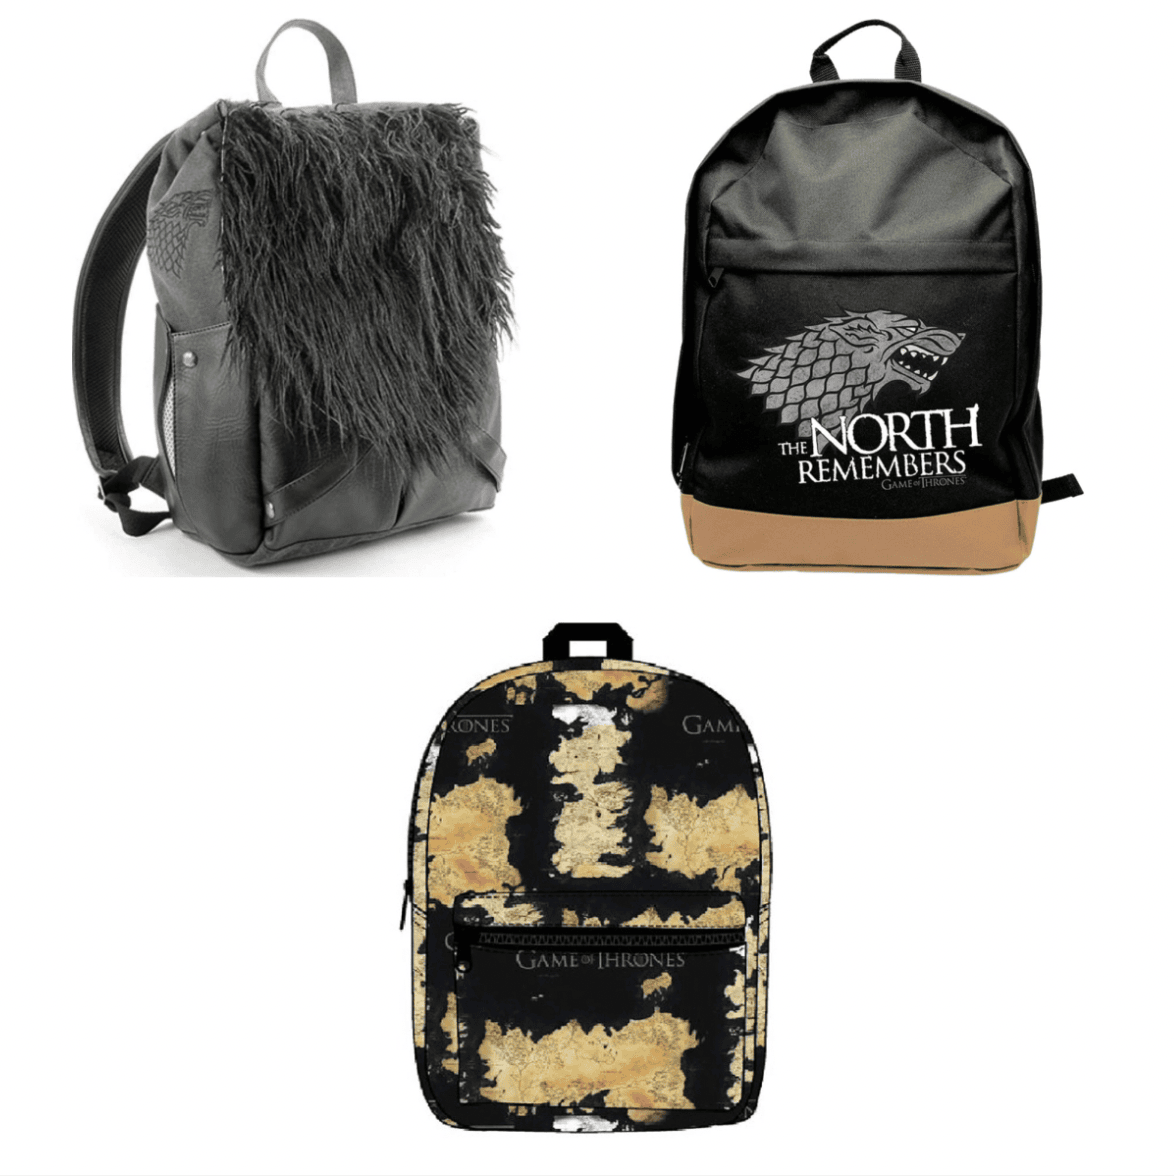 Game of Thrones Backpack Bag Jon Snow - Westeros - The North Remembers - Direwolf